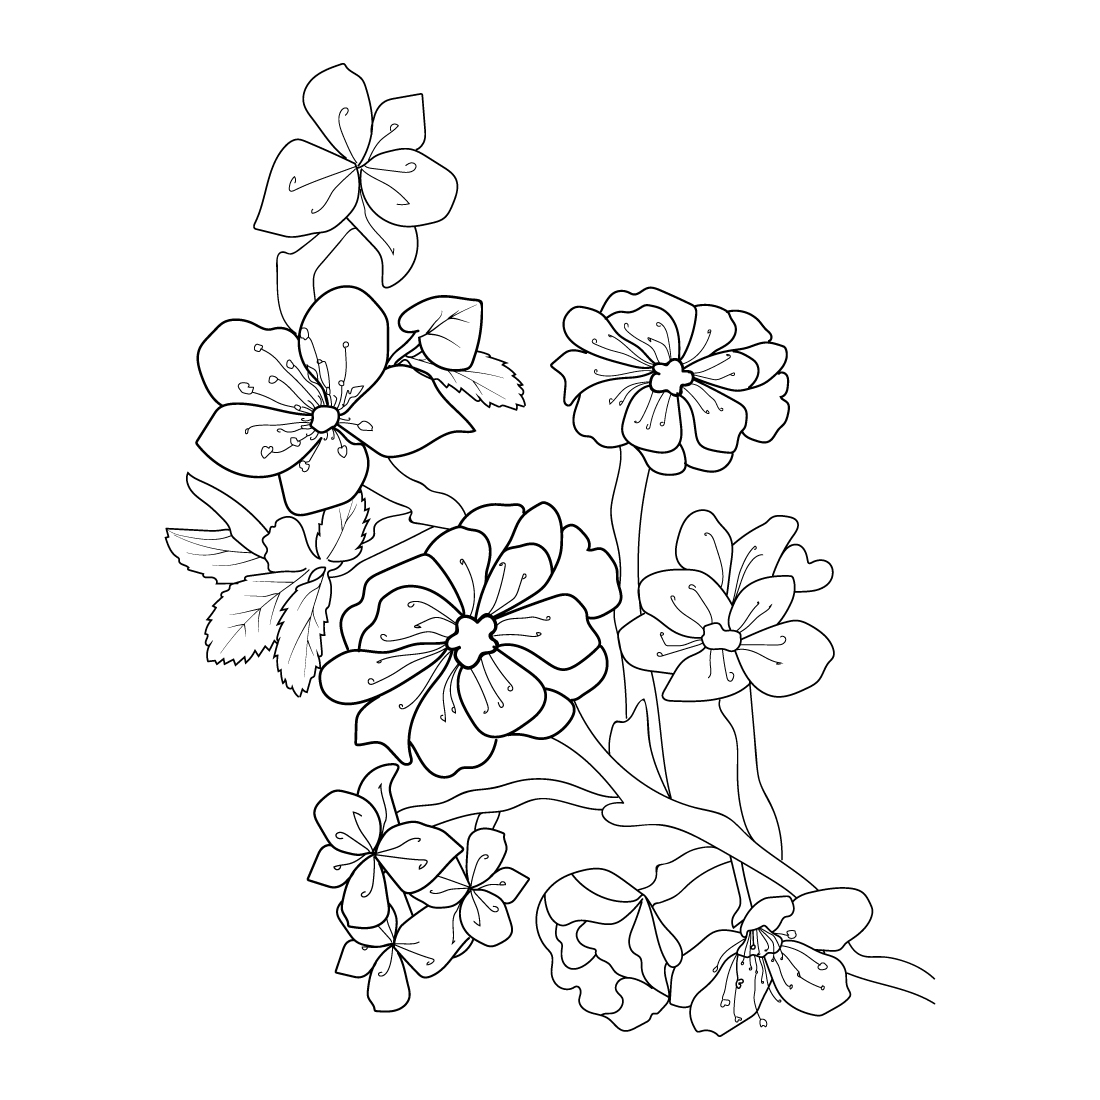 Black and white drawing of flowers on a white background.